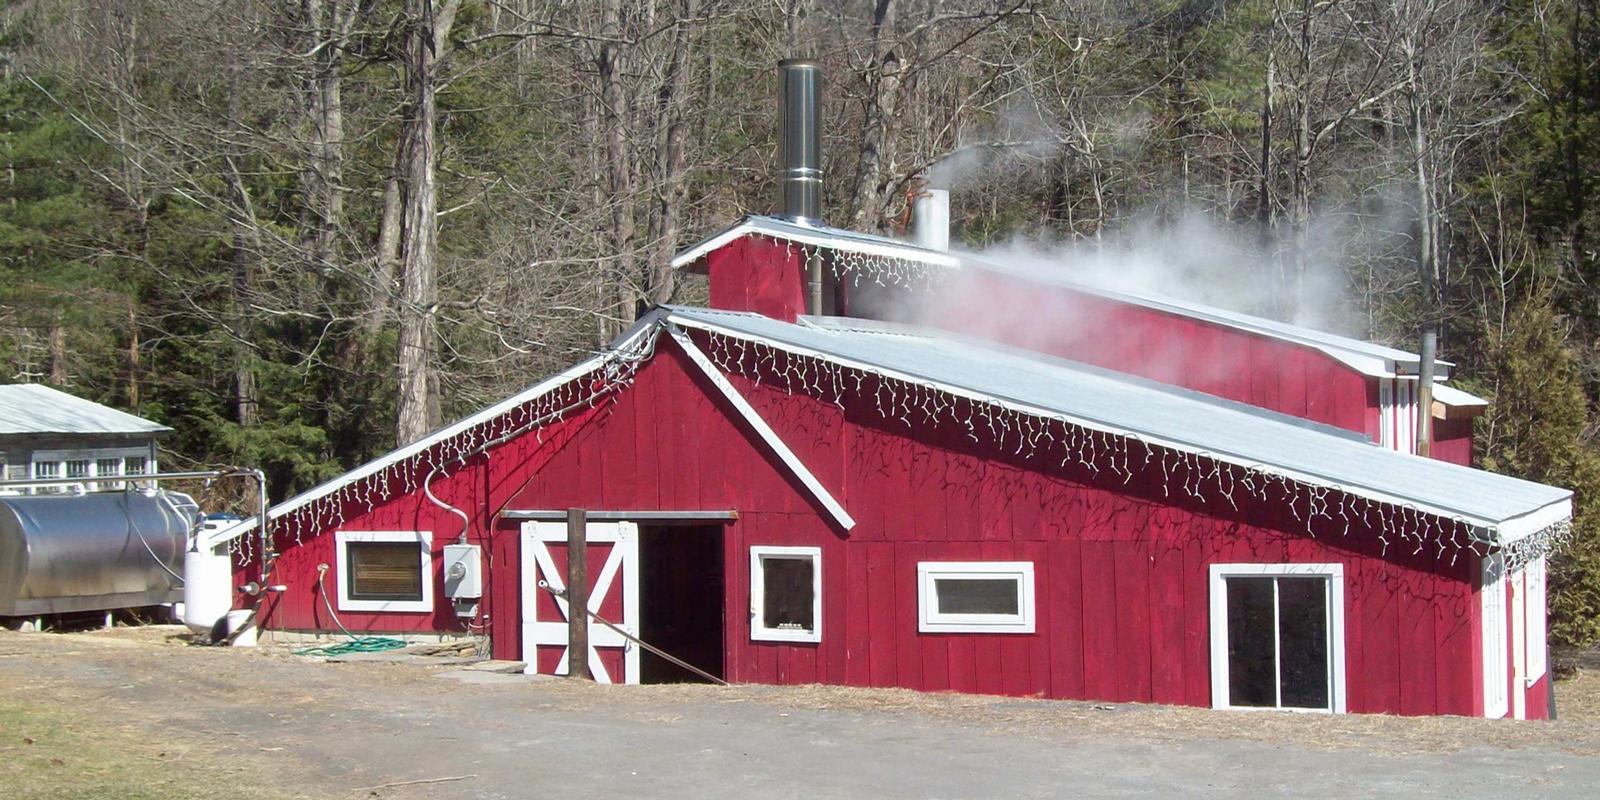 Makers of Quality Maple Products since 1971